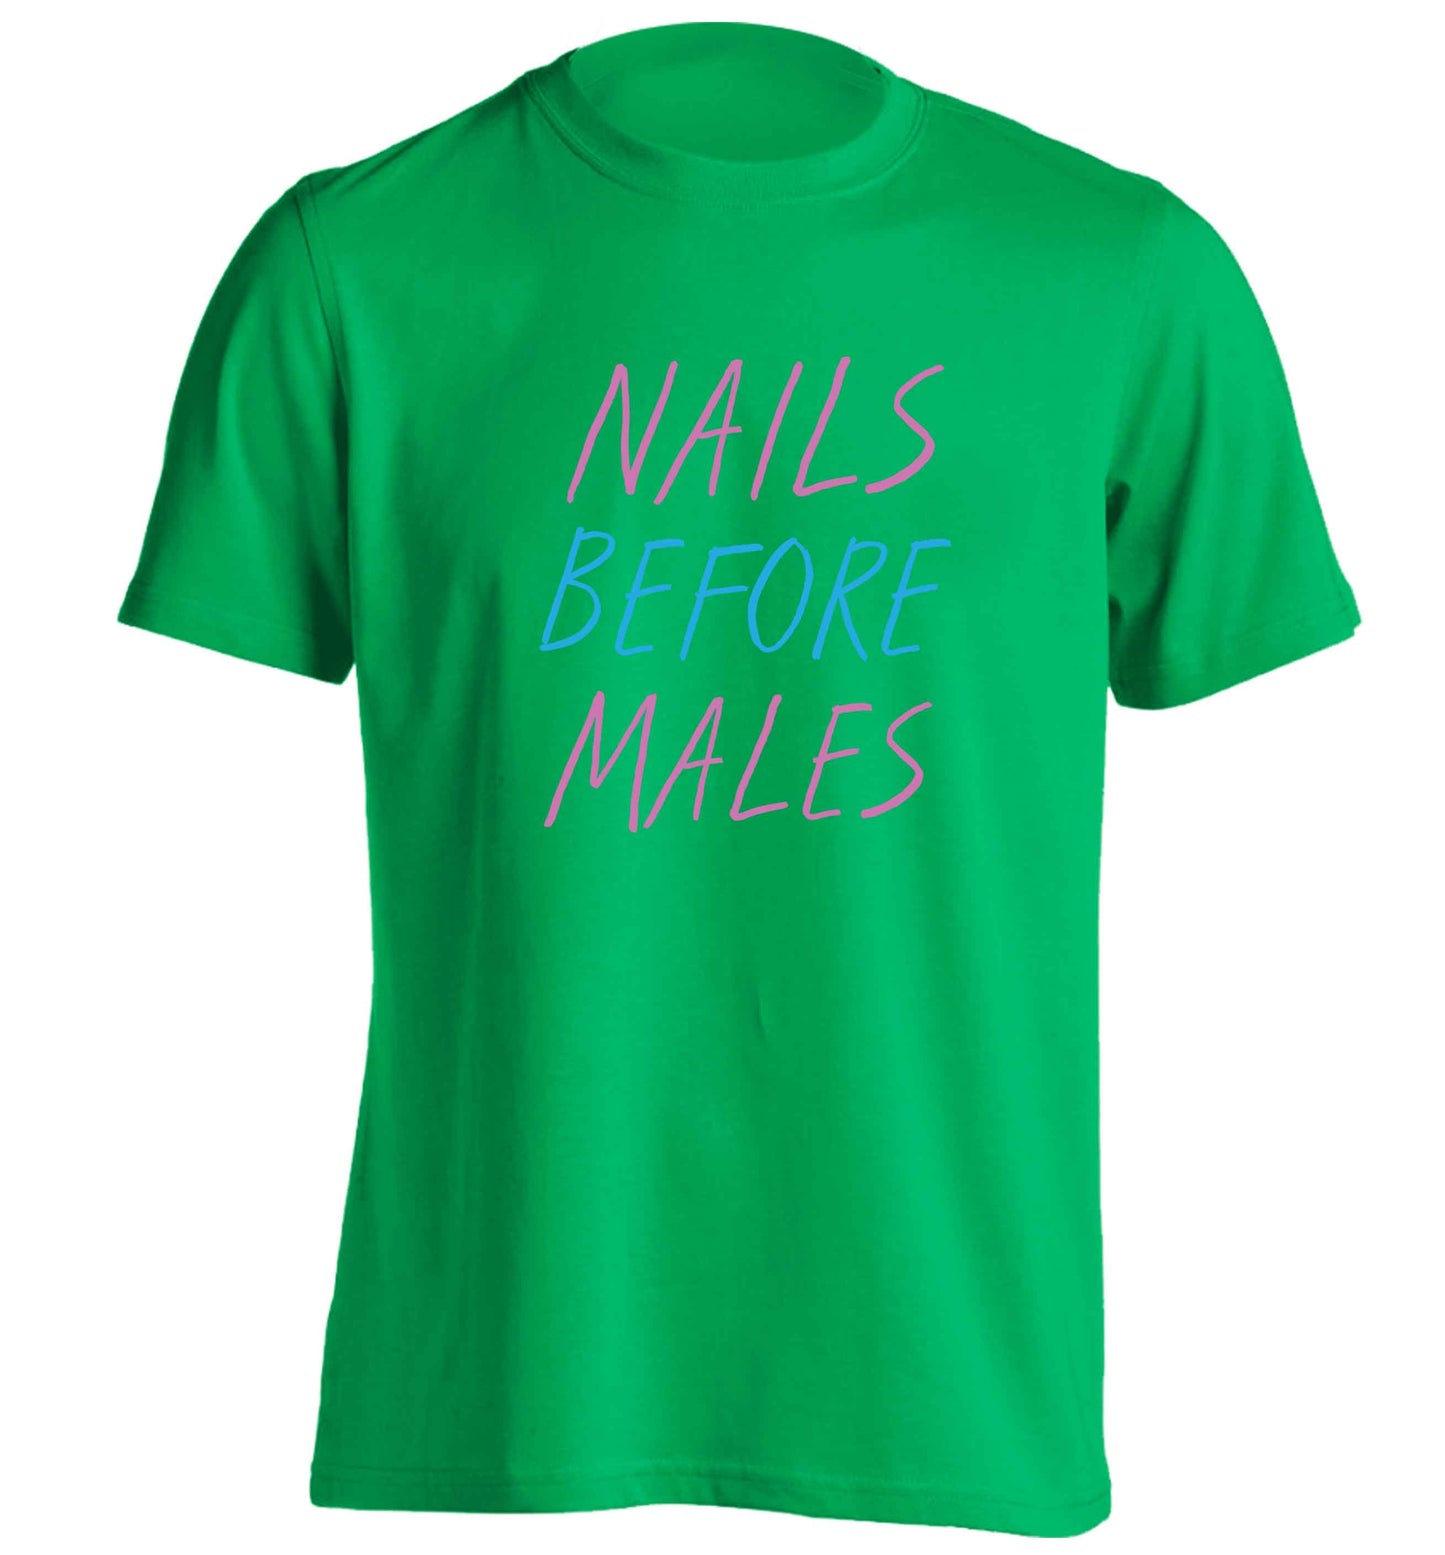 Nails before males adults unisex green Tshirt 2XL